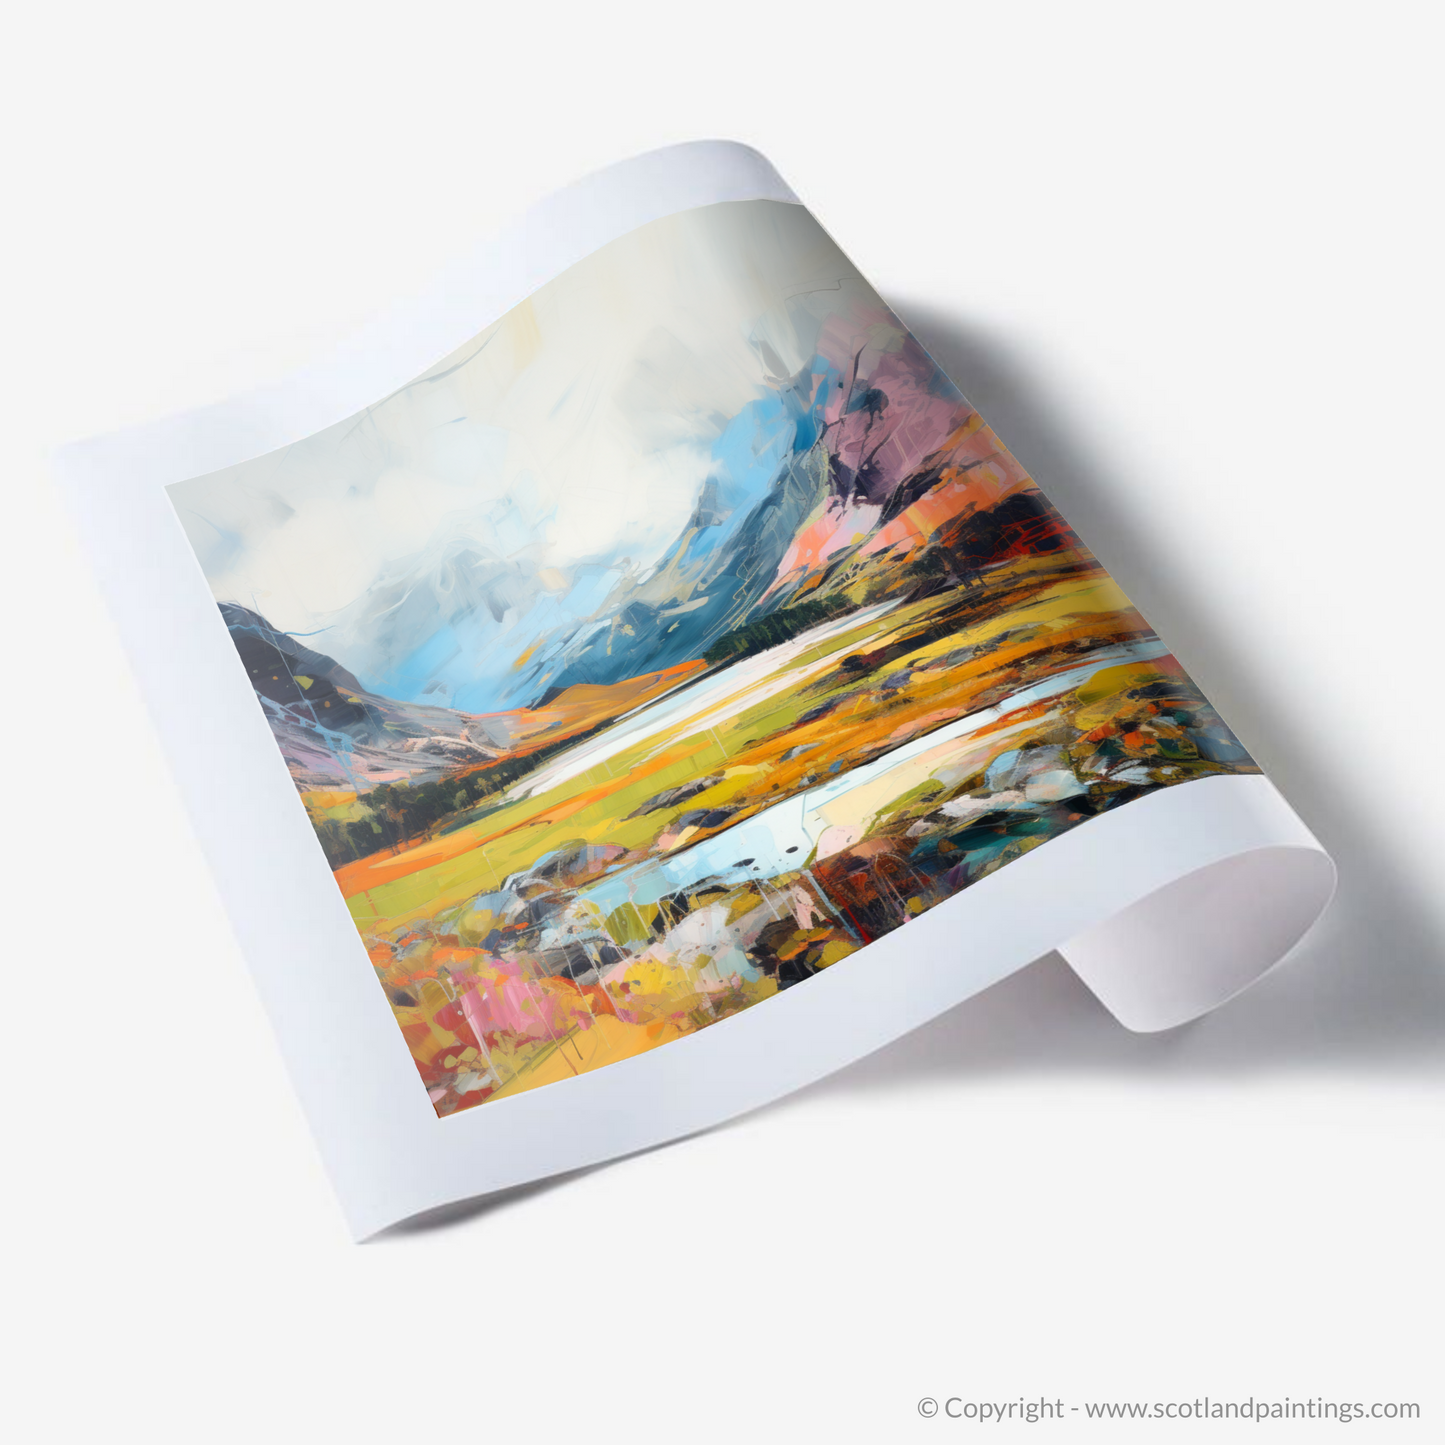 Painting and Art Print of Glen Coe, Highlands in summer. Summer Symphony of Glen Coe Highlands.